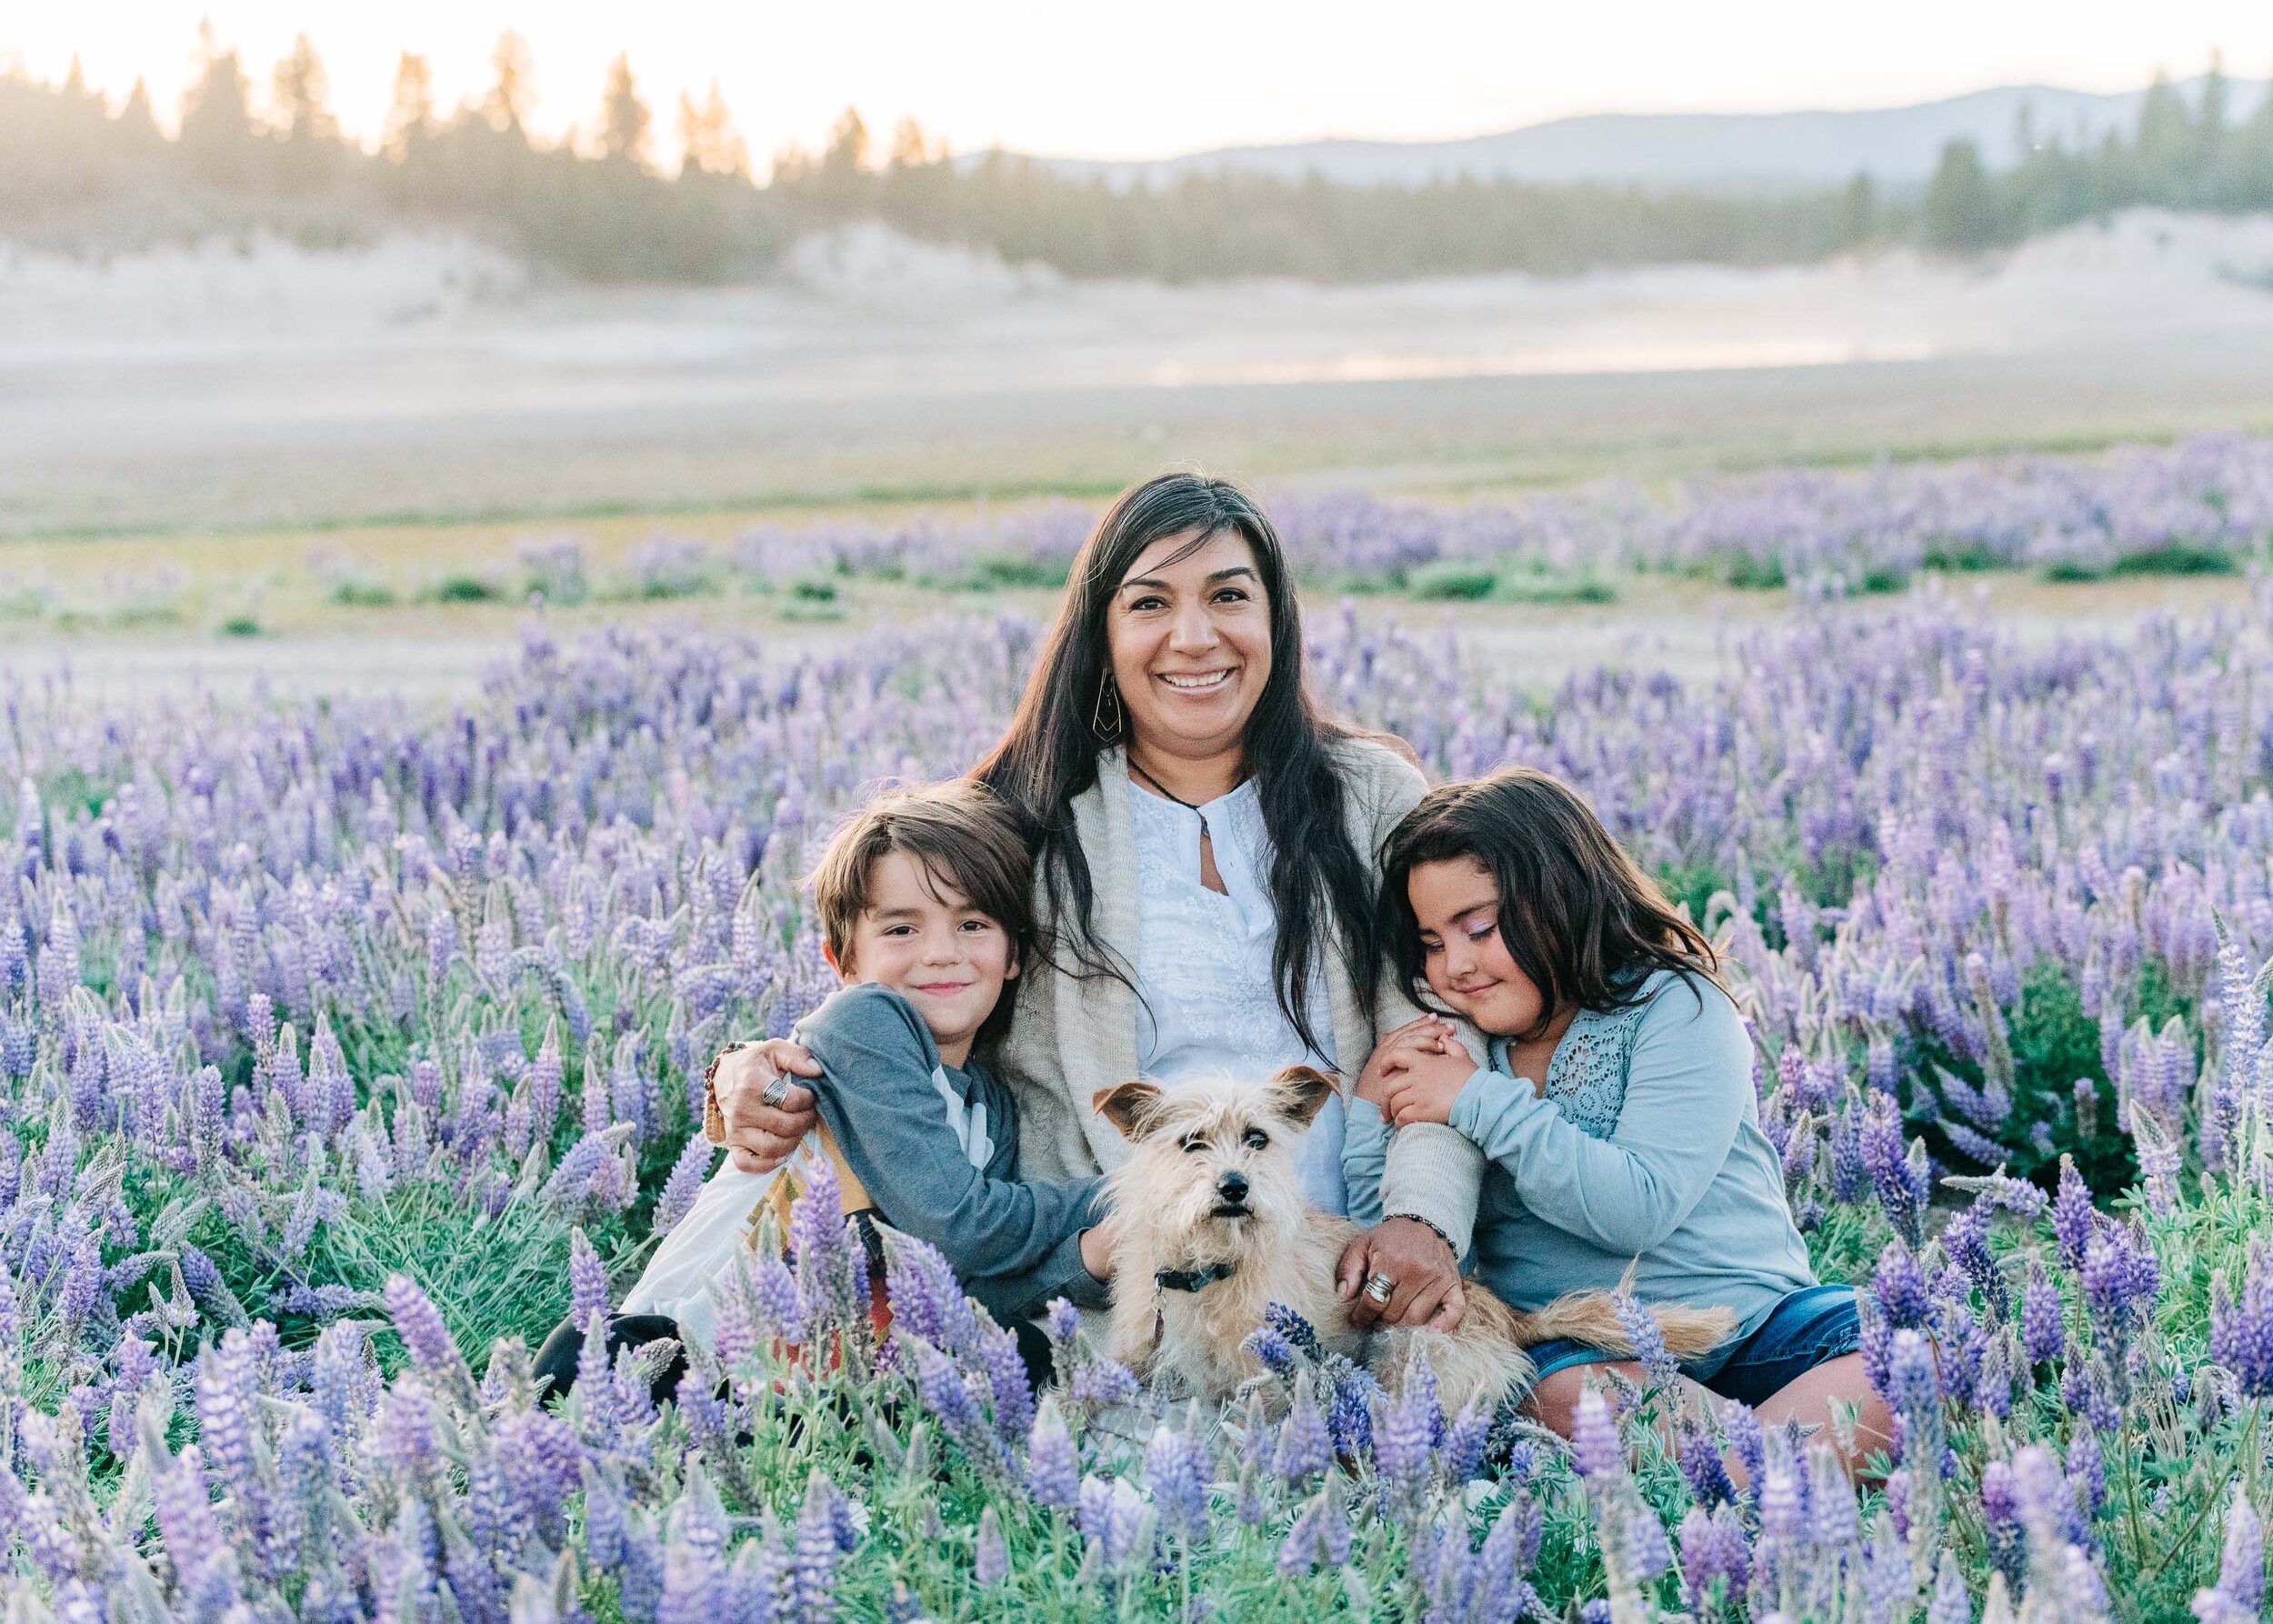 Lupine Wildflowers in Truckee, Lifestyle Reno Photography - Kelli Price Photography